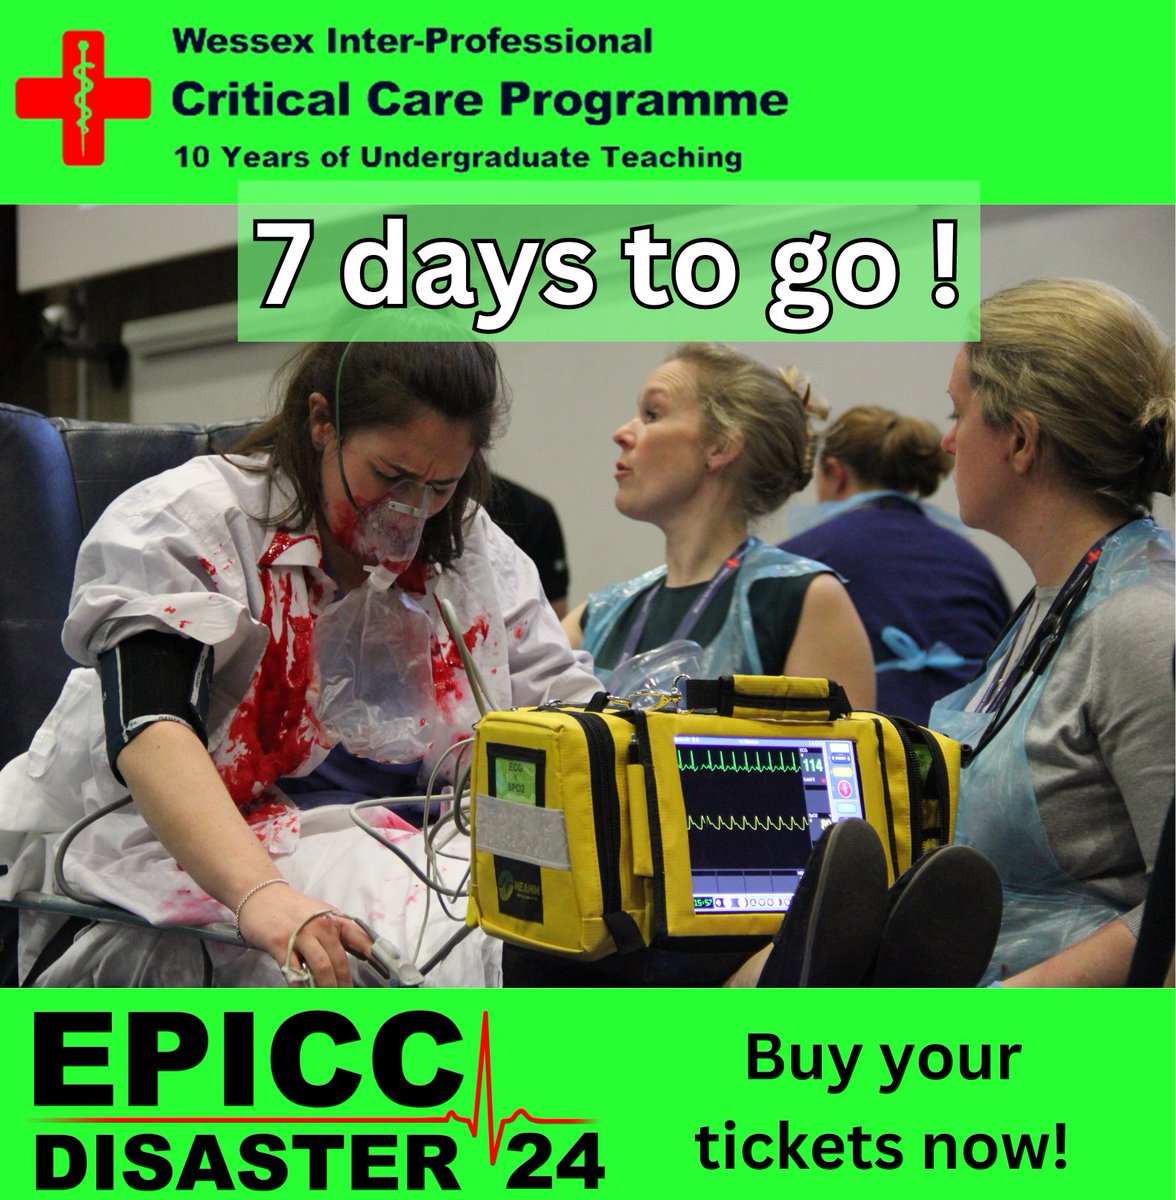 📢 Only 1 week left until our pre-hospital emergency conference! 📢 Book your ticket now at ww.bookwhen.com/wessexccp At Southampton General Hospital, 23rd and 24th of March! CPD certificates on attendance ✅ Come along for some fantastic clinician-led lectures and workshops. 🚑